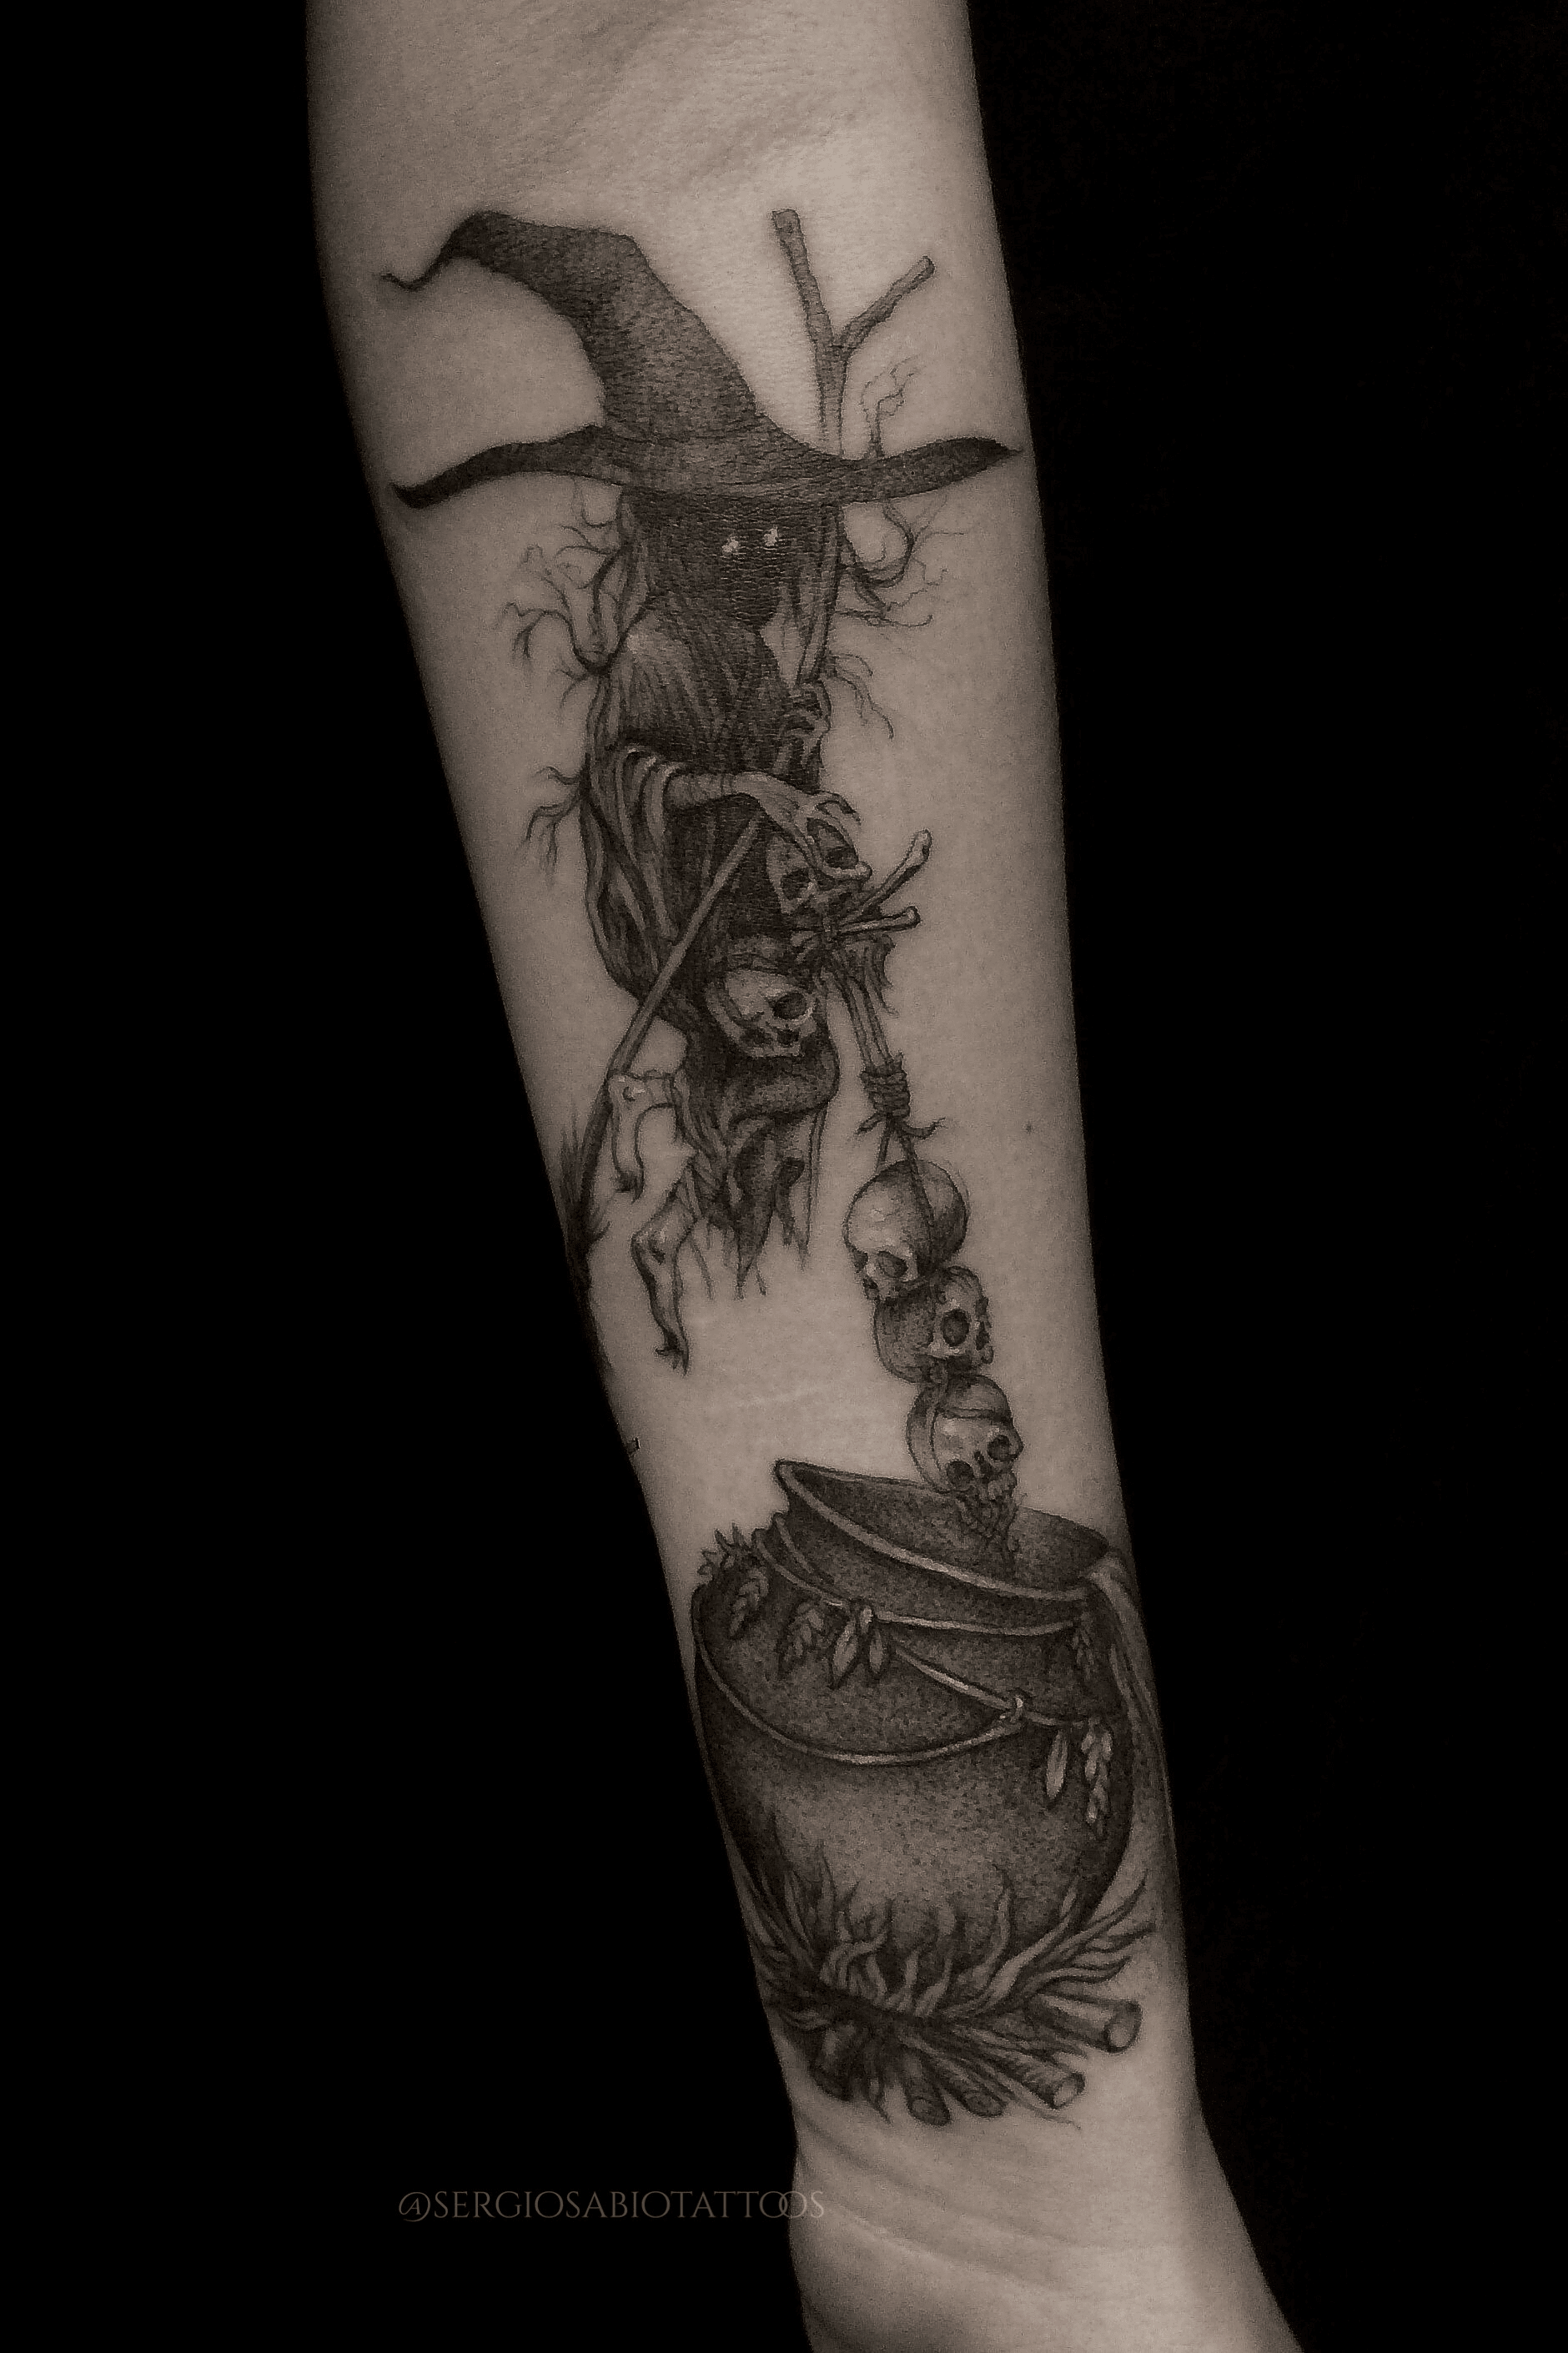 Sketch work witch portrait tattoo on the upper arm